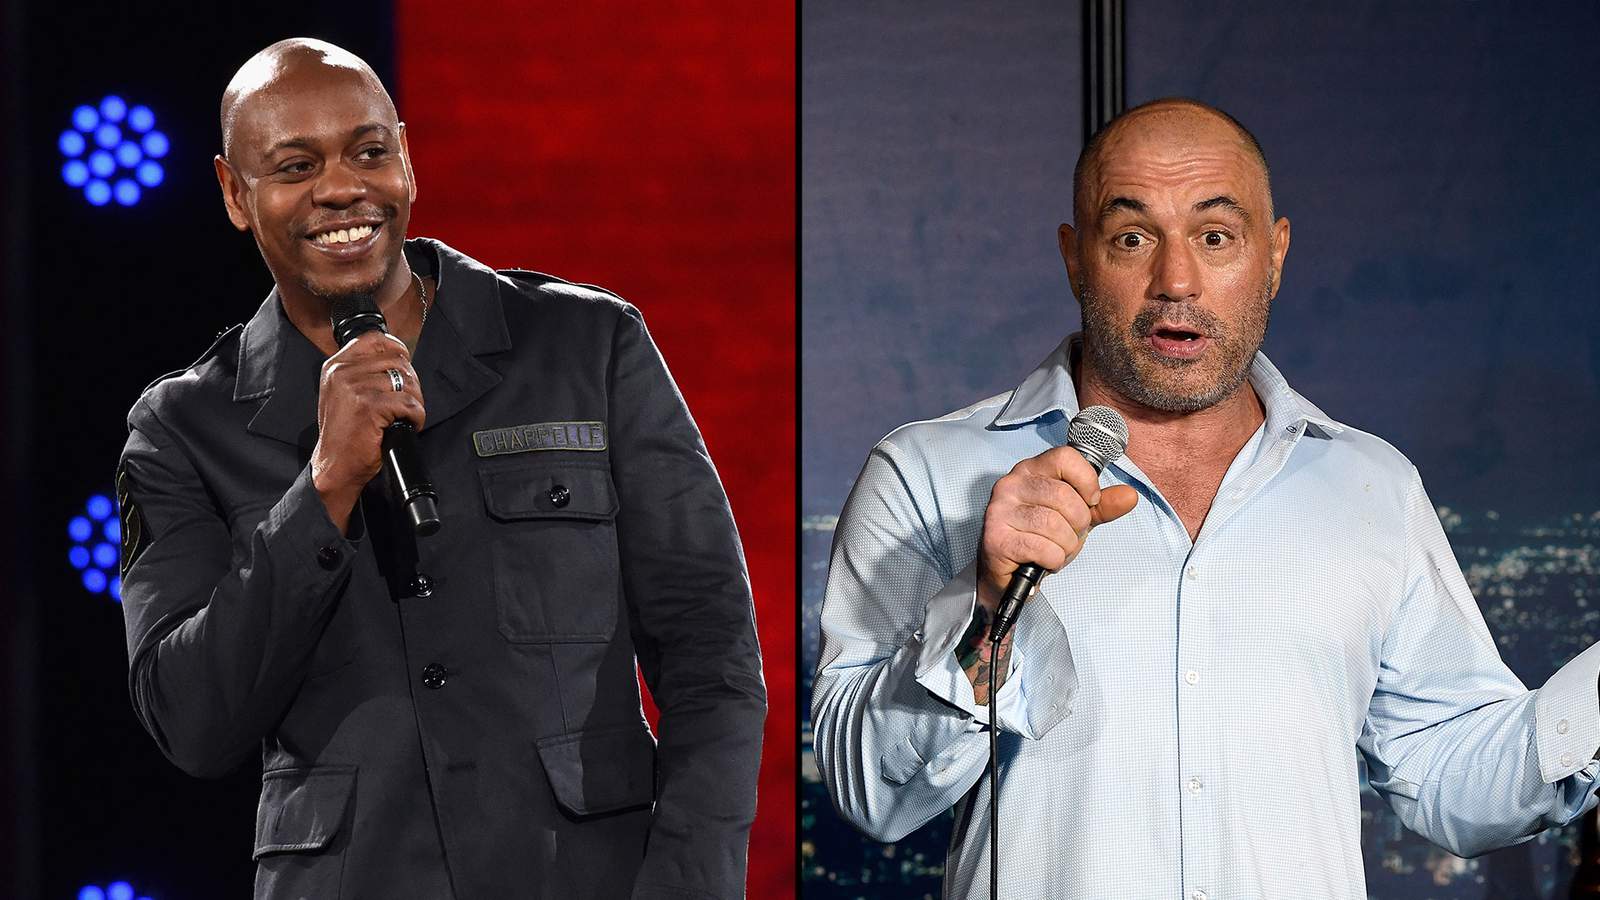 Dave Chappelle performing 10 shows in Austin, including 5 with newest celebrity Texan Joe Rogan